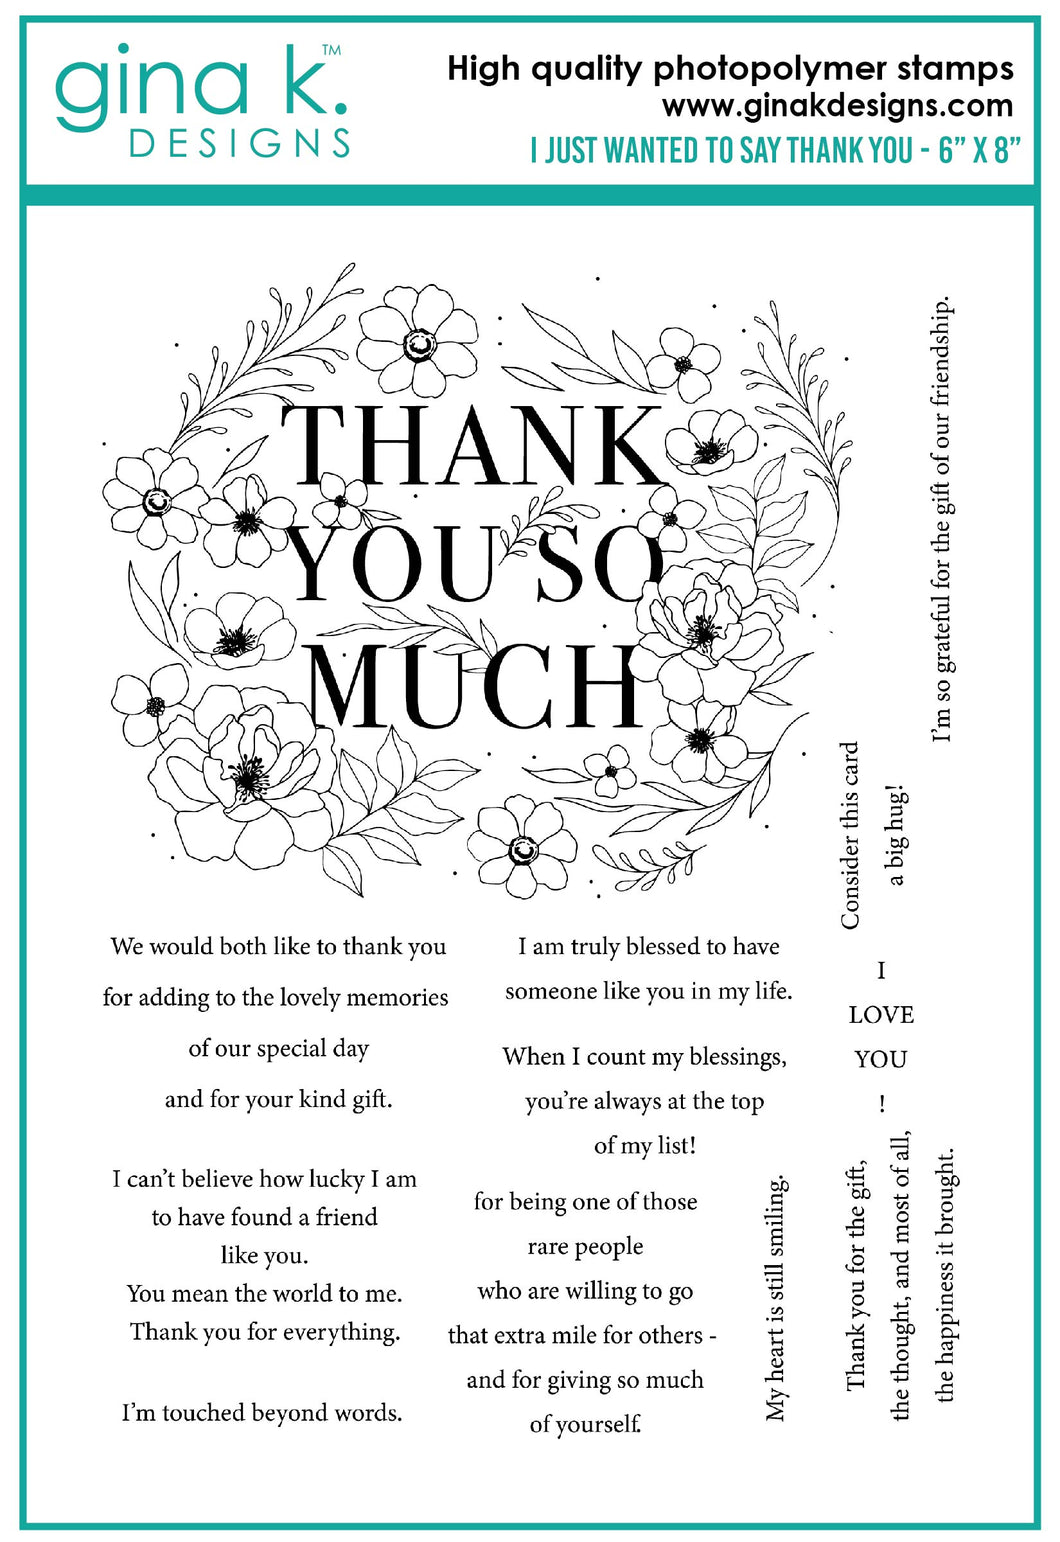 Gina K. Designs - Stamp - I Just Wanted to Say Thank You. I Just Wanted to Say Thank You is a stamp set by Hannah Drapinski. This set is made of premium clear photopolymer and measures 6